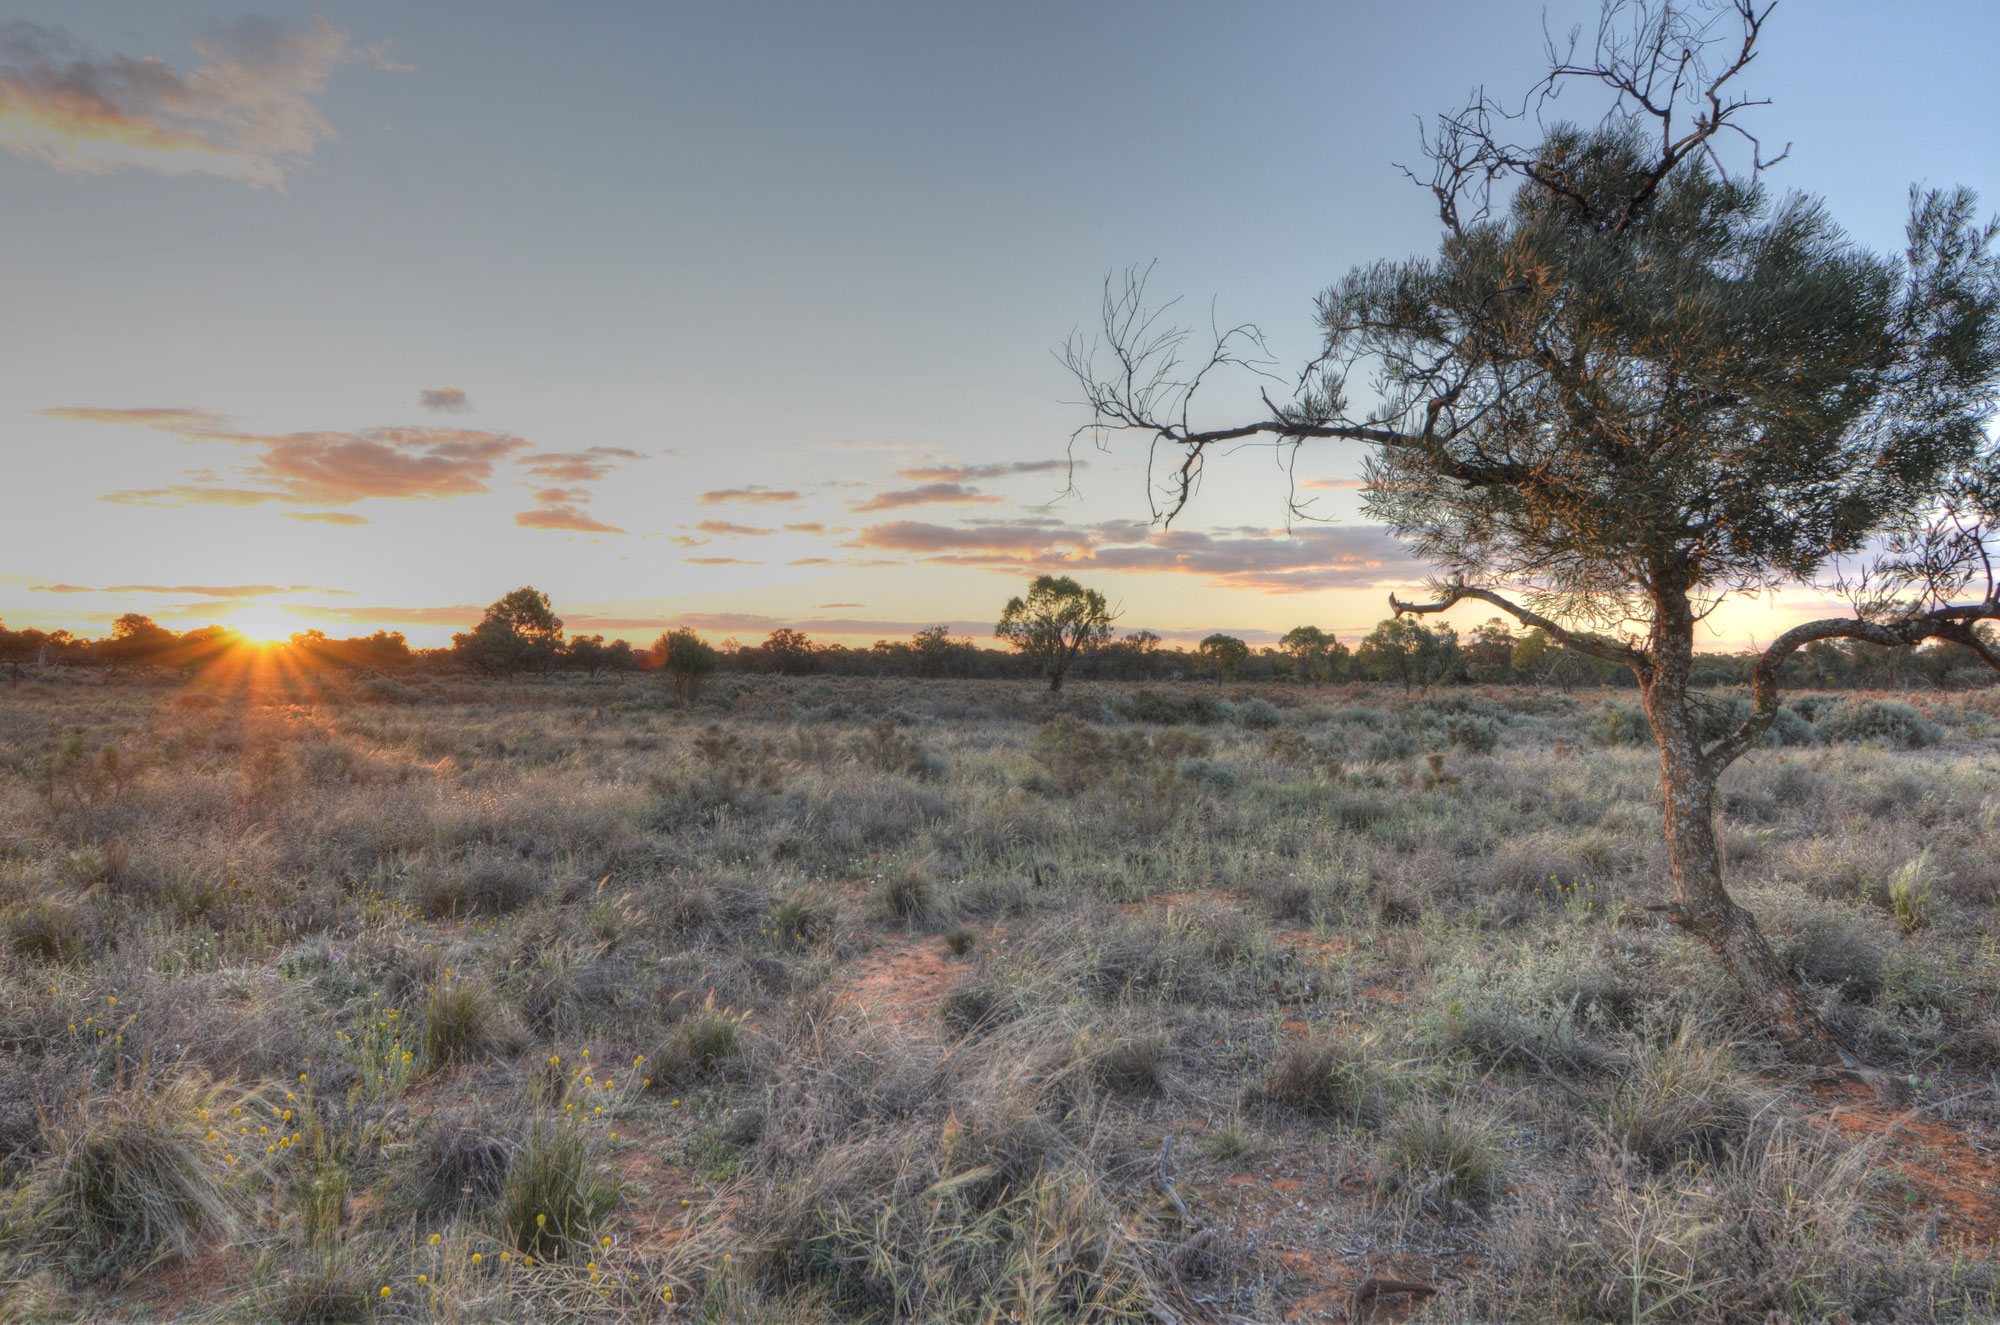 Photograph of savanna near Lake Mungo, New South Wales, Australia. The photo show a dry grassland with scattered trees. One lone tree is in the foreground.